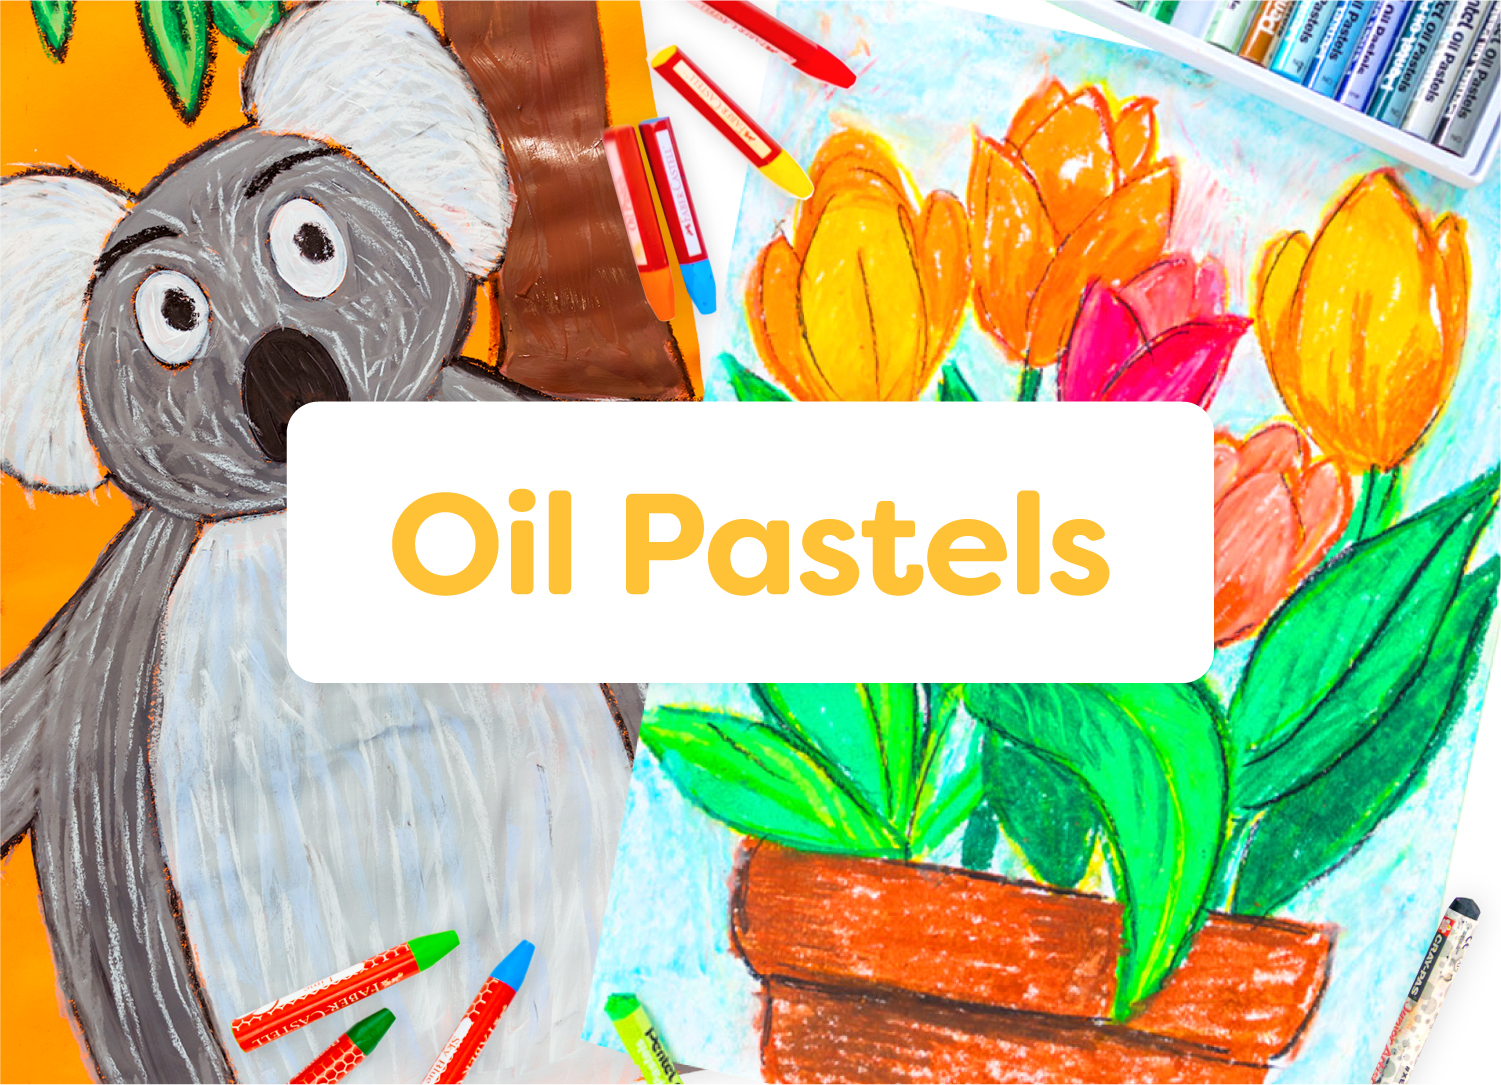 Oil Pastels; art lessons for kids by category